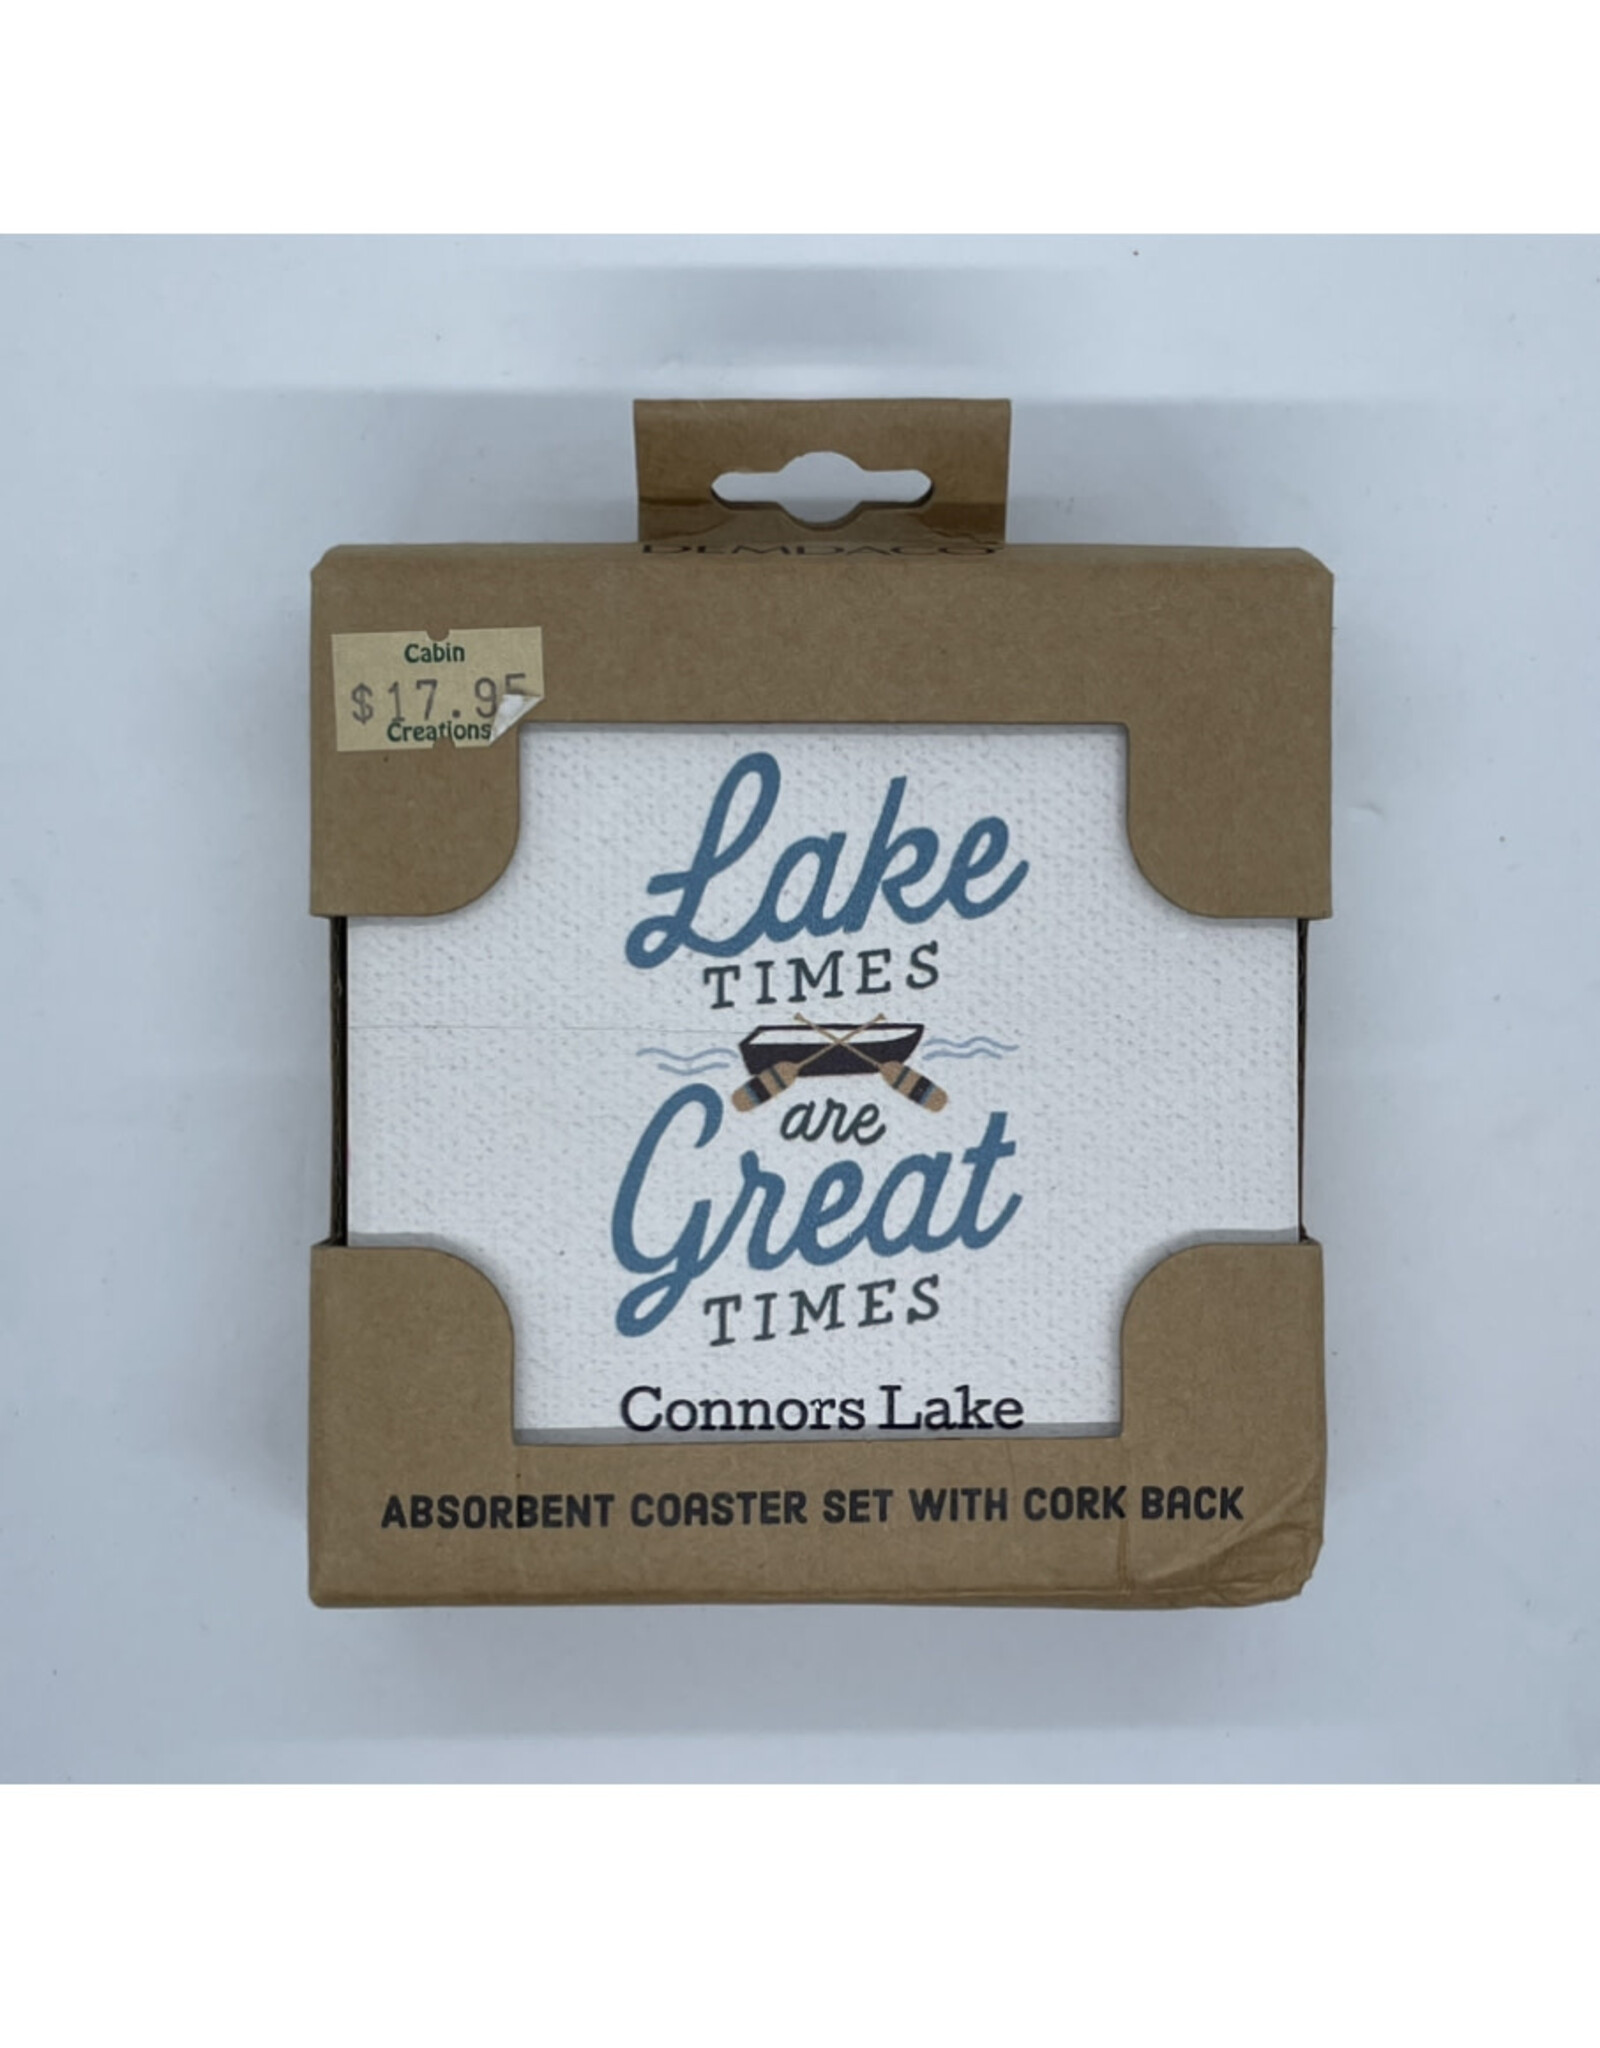 Demdaco Lake Times Are Great Times Coaster Set - Connors Lake